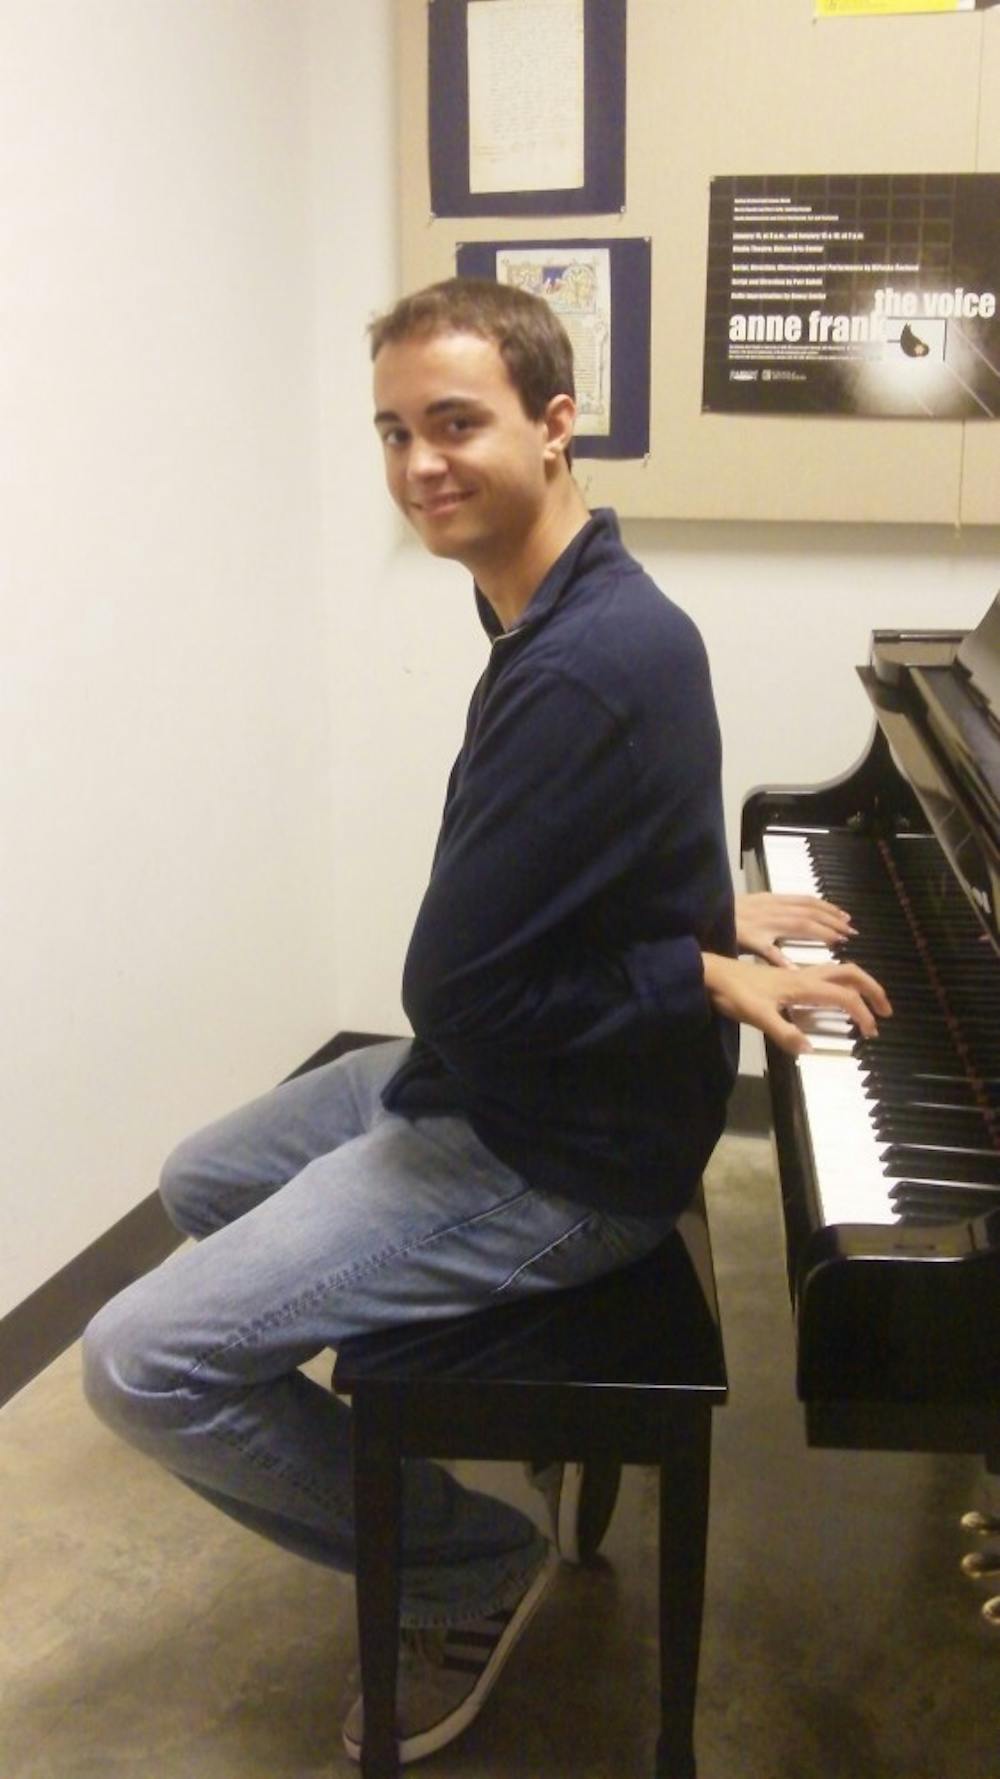 Evan Petroneâ€™s YouTube video of himself playing the piano backwards went viral, getting over half a million views.